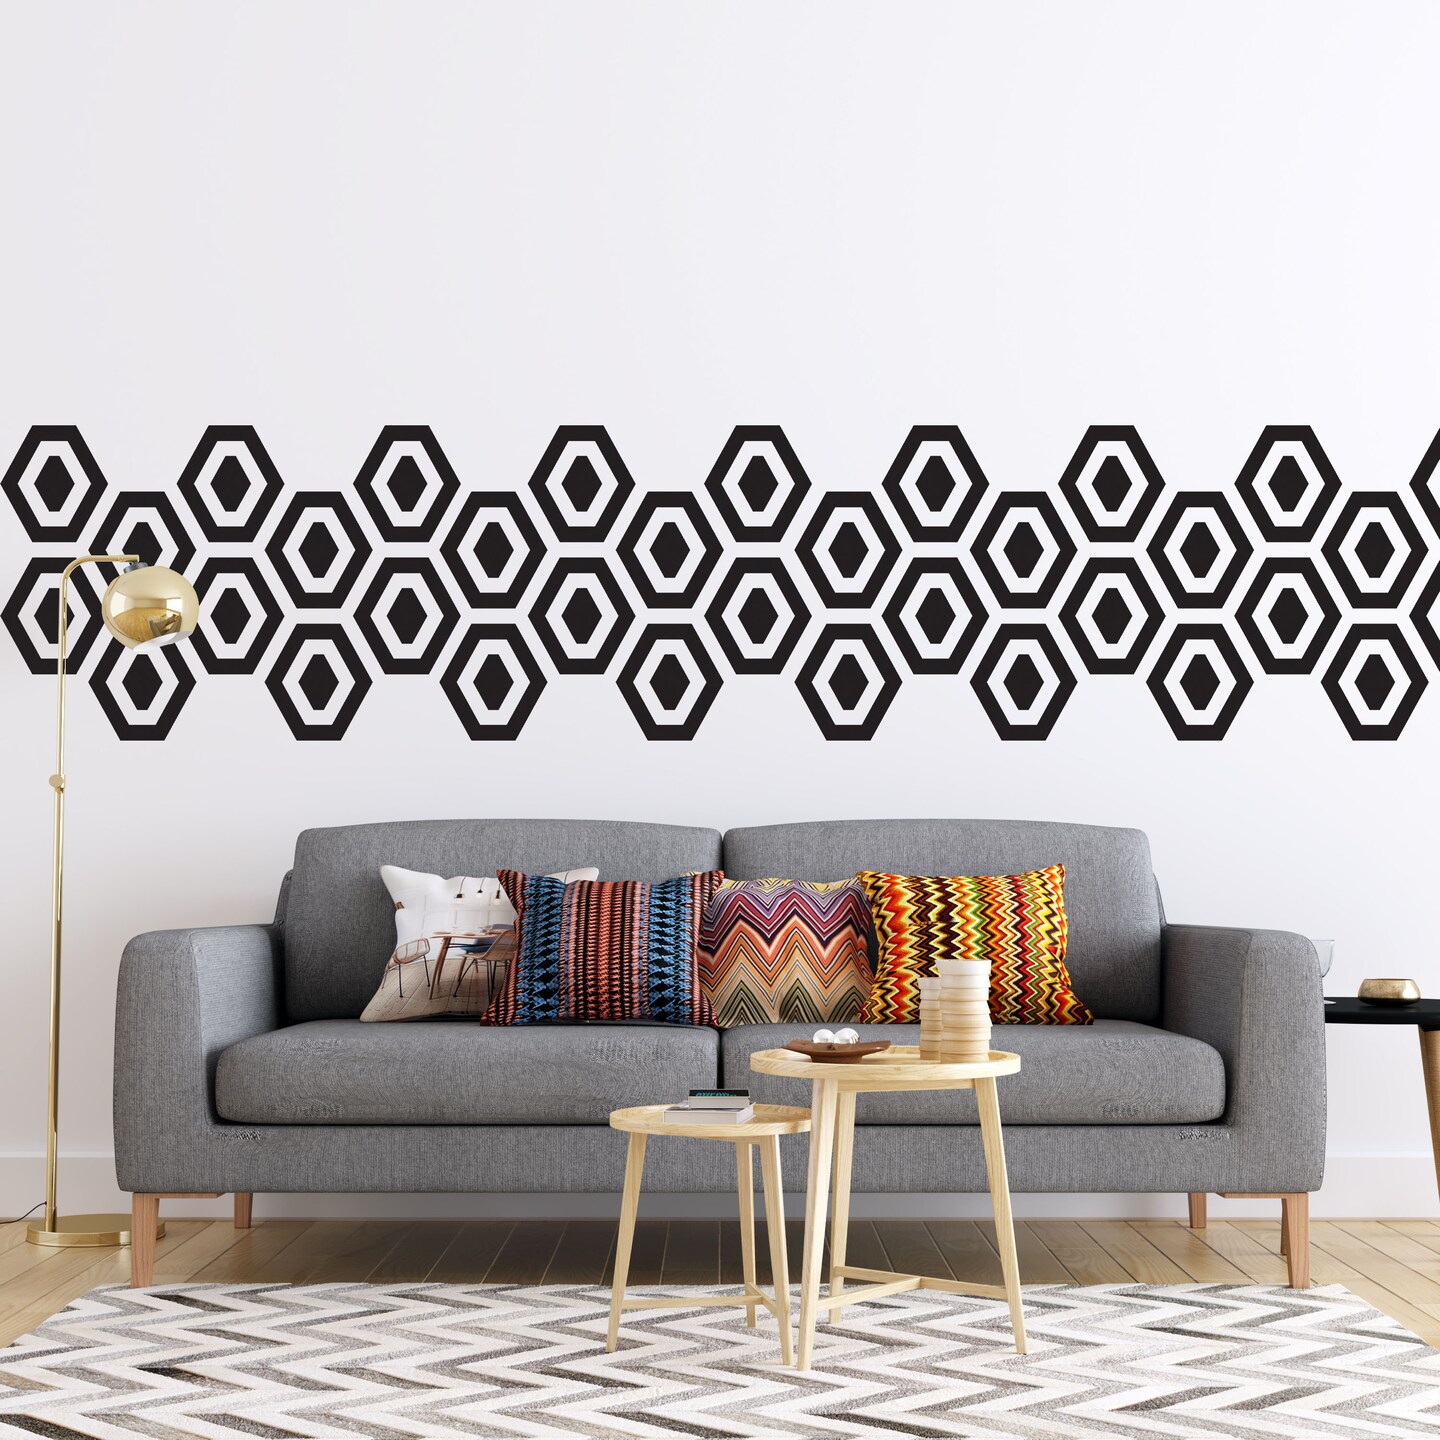 Hexagon Wall Decal Set/ Honeycomb Decor Decals/ Wall Decor/ Modern Hexagon  Wall Decal/ Hexagon Vinyl Decal/ Honeycomb Sticker/ FREE SHIPPING 